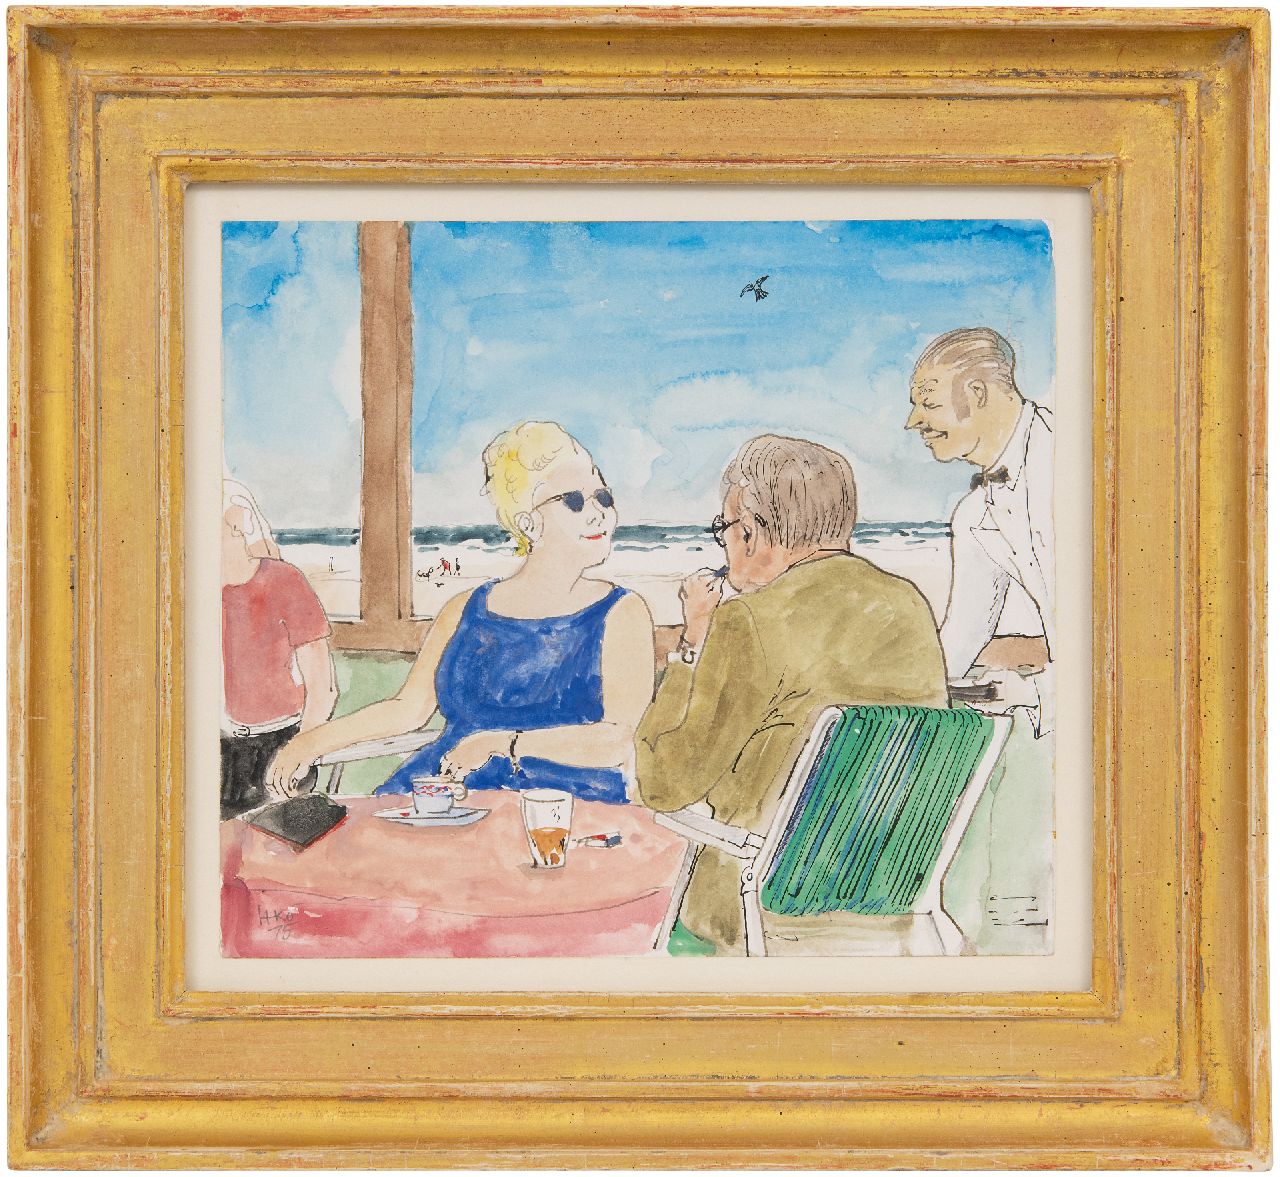 Kamerlingh Onnes H.H.  | 'Harm' Henrick Kamerlingh Onnes | Watercolours and drawings offered for sale | Summer day on a terrace by the sea, pencil, pen and watercolour on paper 21.1 x 24.1 cm, signed l.l. with monogram and dated '75